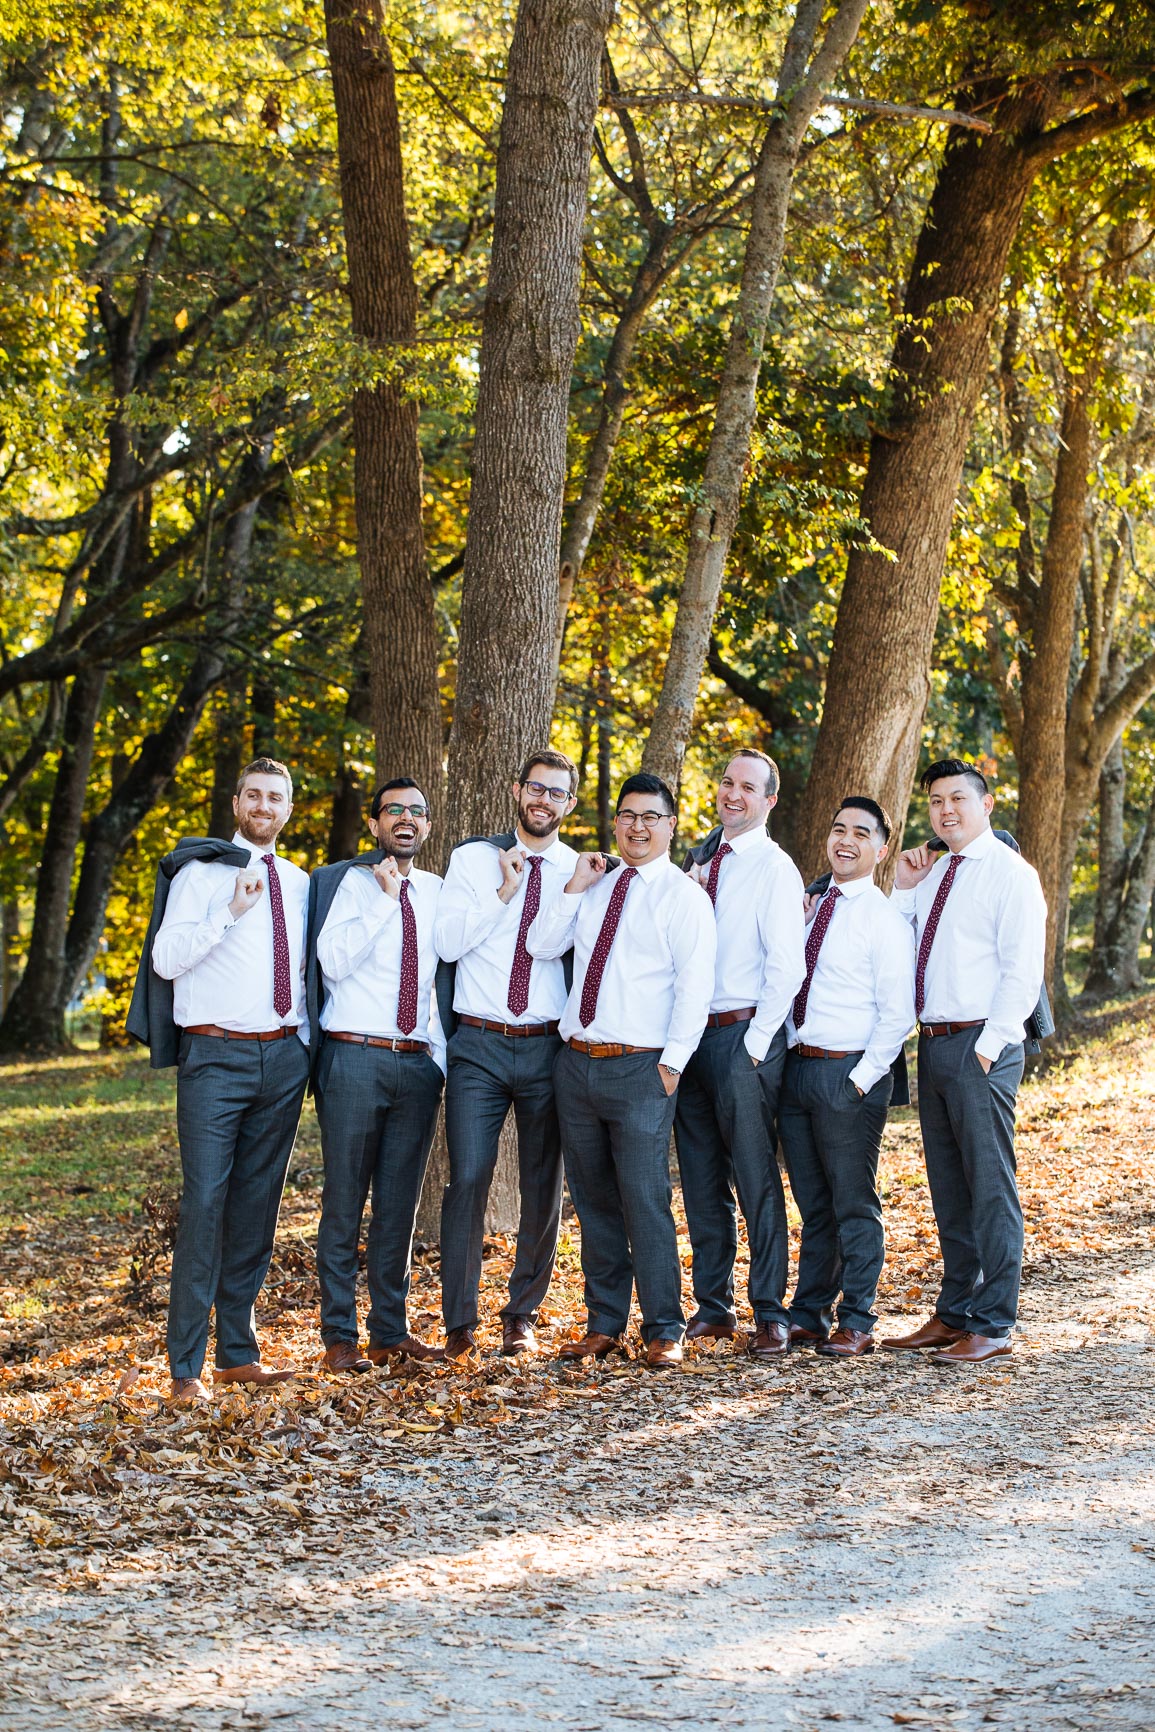 Wedding Party at The Dairy Barn in Fort Mill SC by Nhieu Tang photography | nhieutang.com